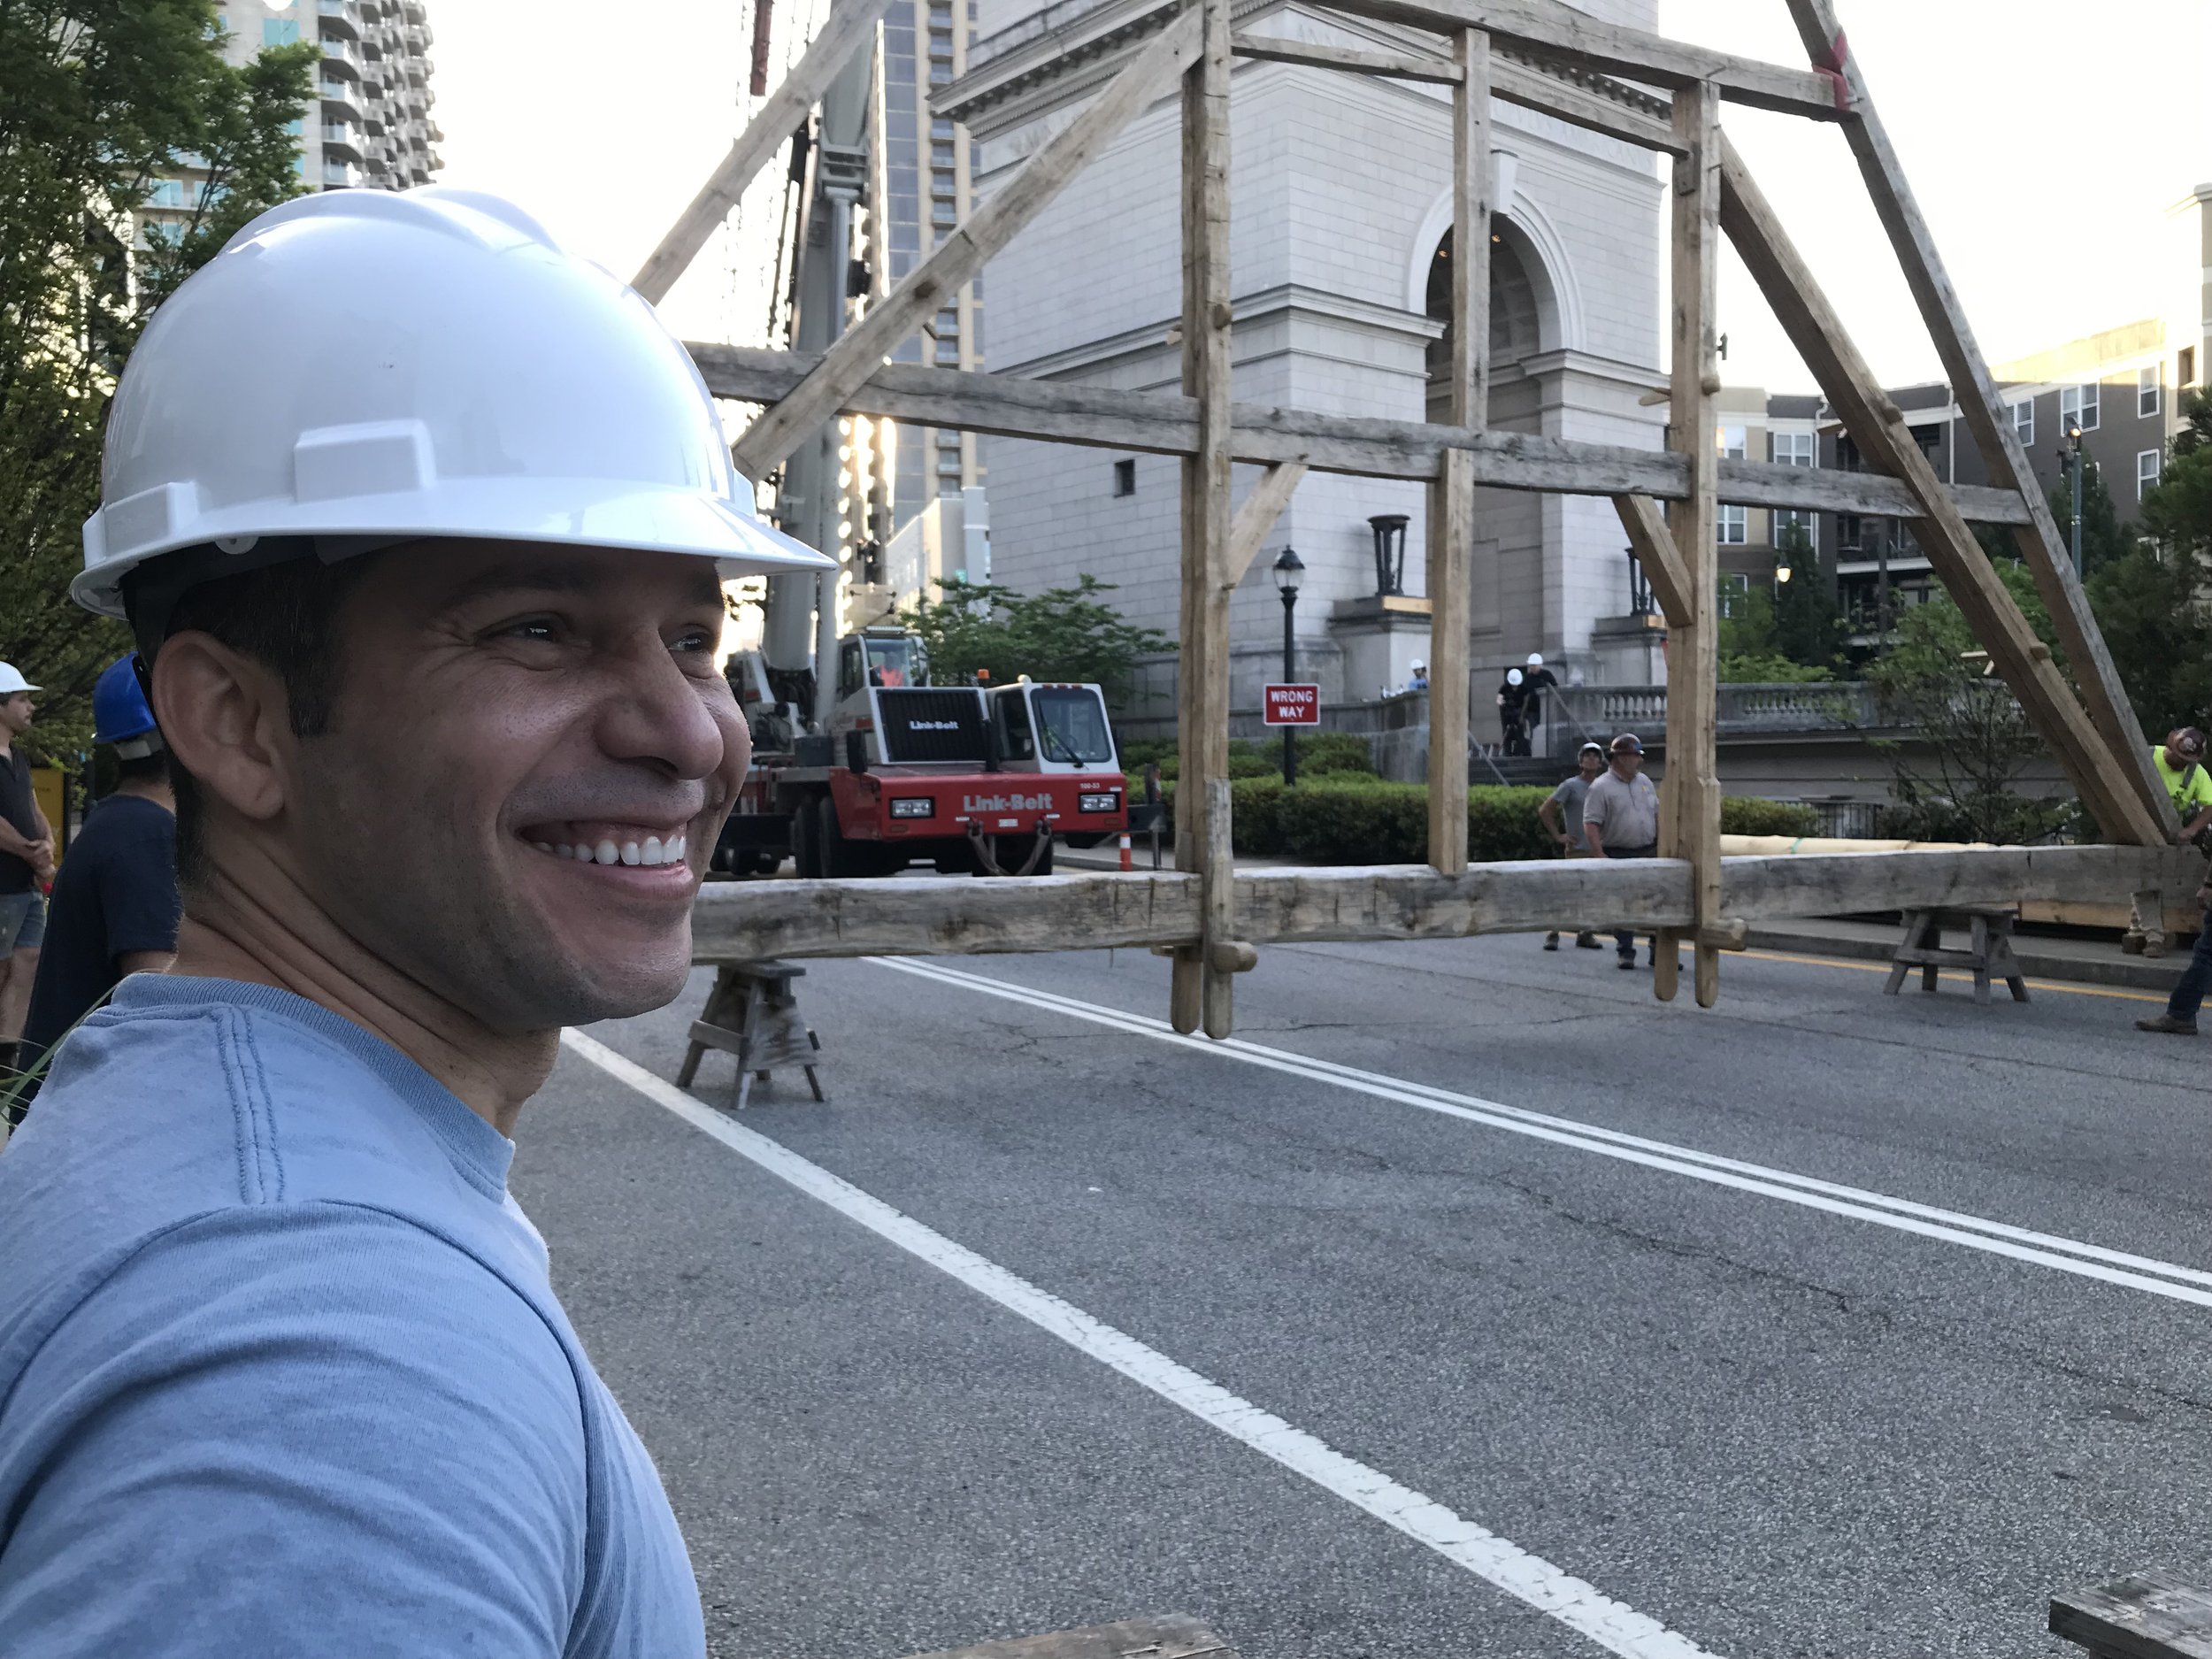 Stunningly multi-talented, Lorenzo DeAlmeida, Catholic University architecture faculty enjoying a moment to marvel at the truss in transit.